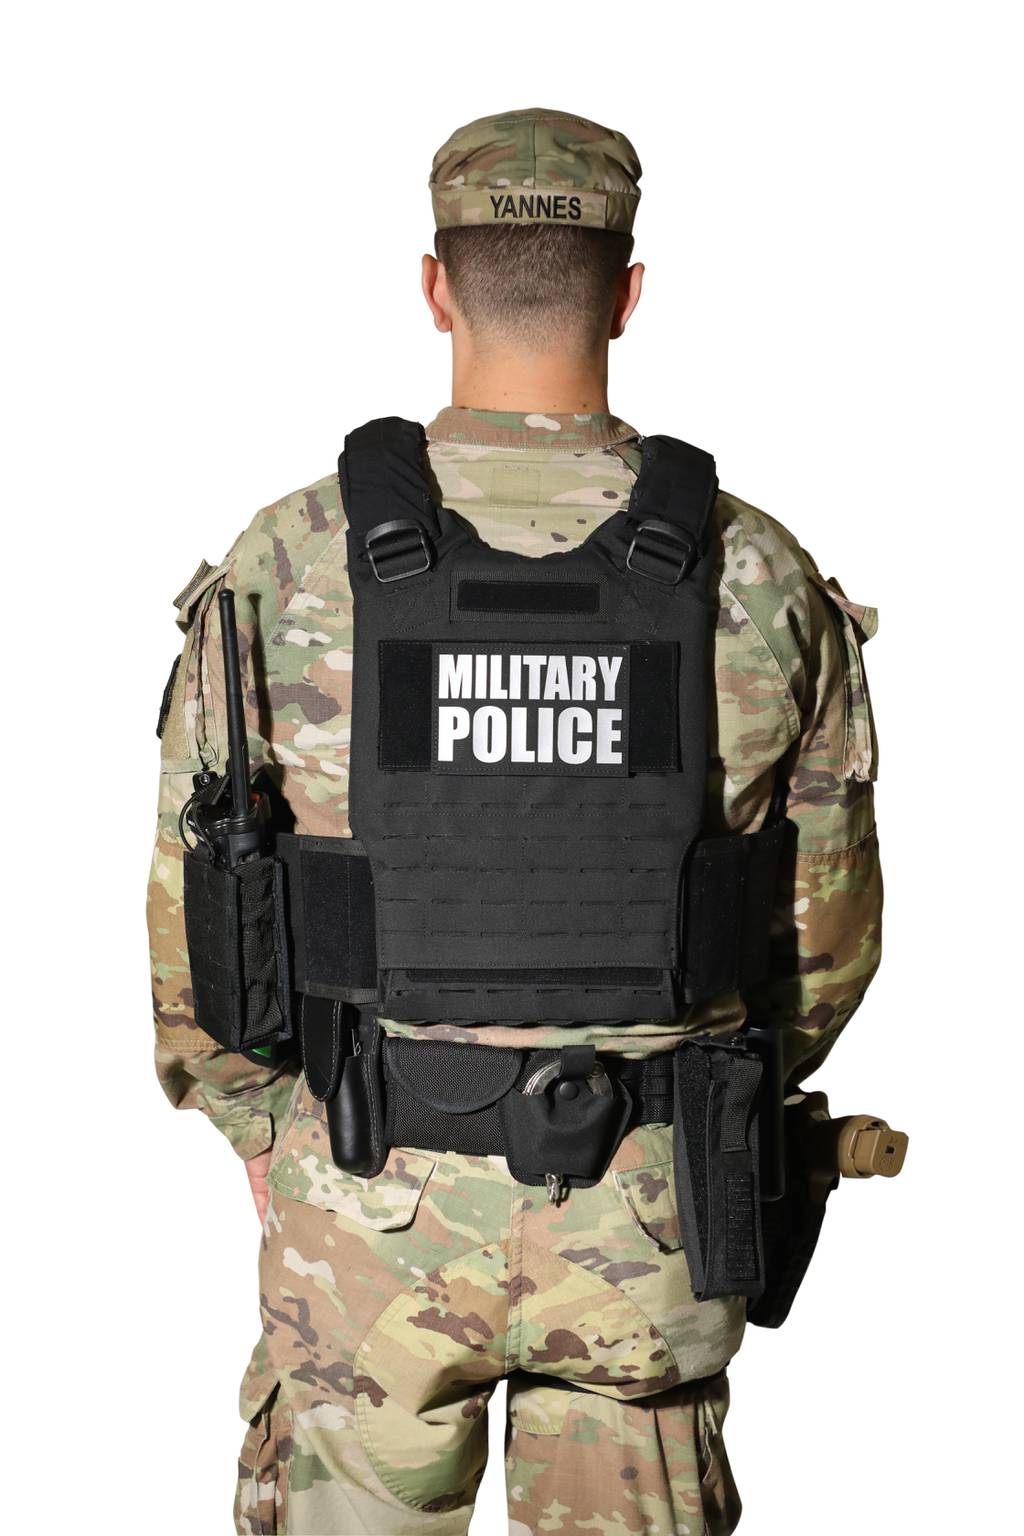 Updates on soldier gear cold weather, targeting, body armor